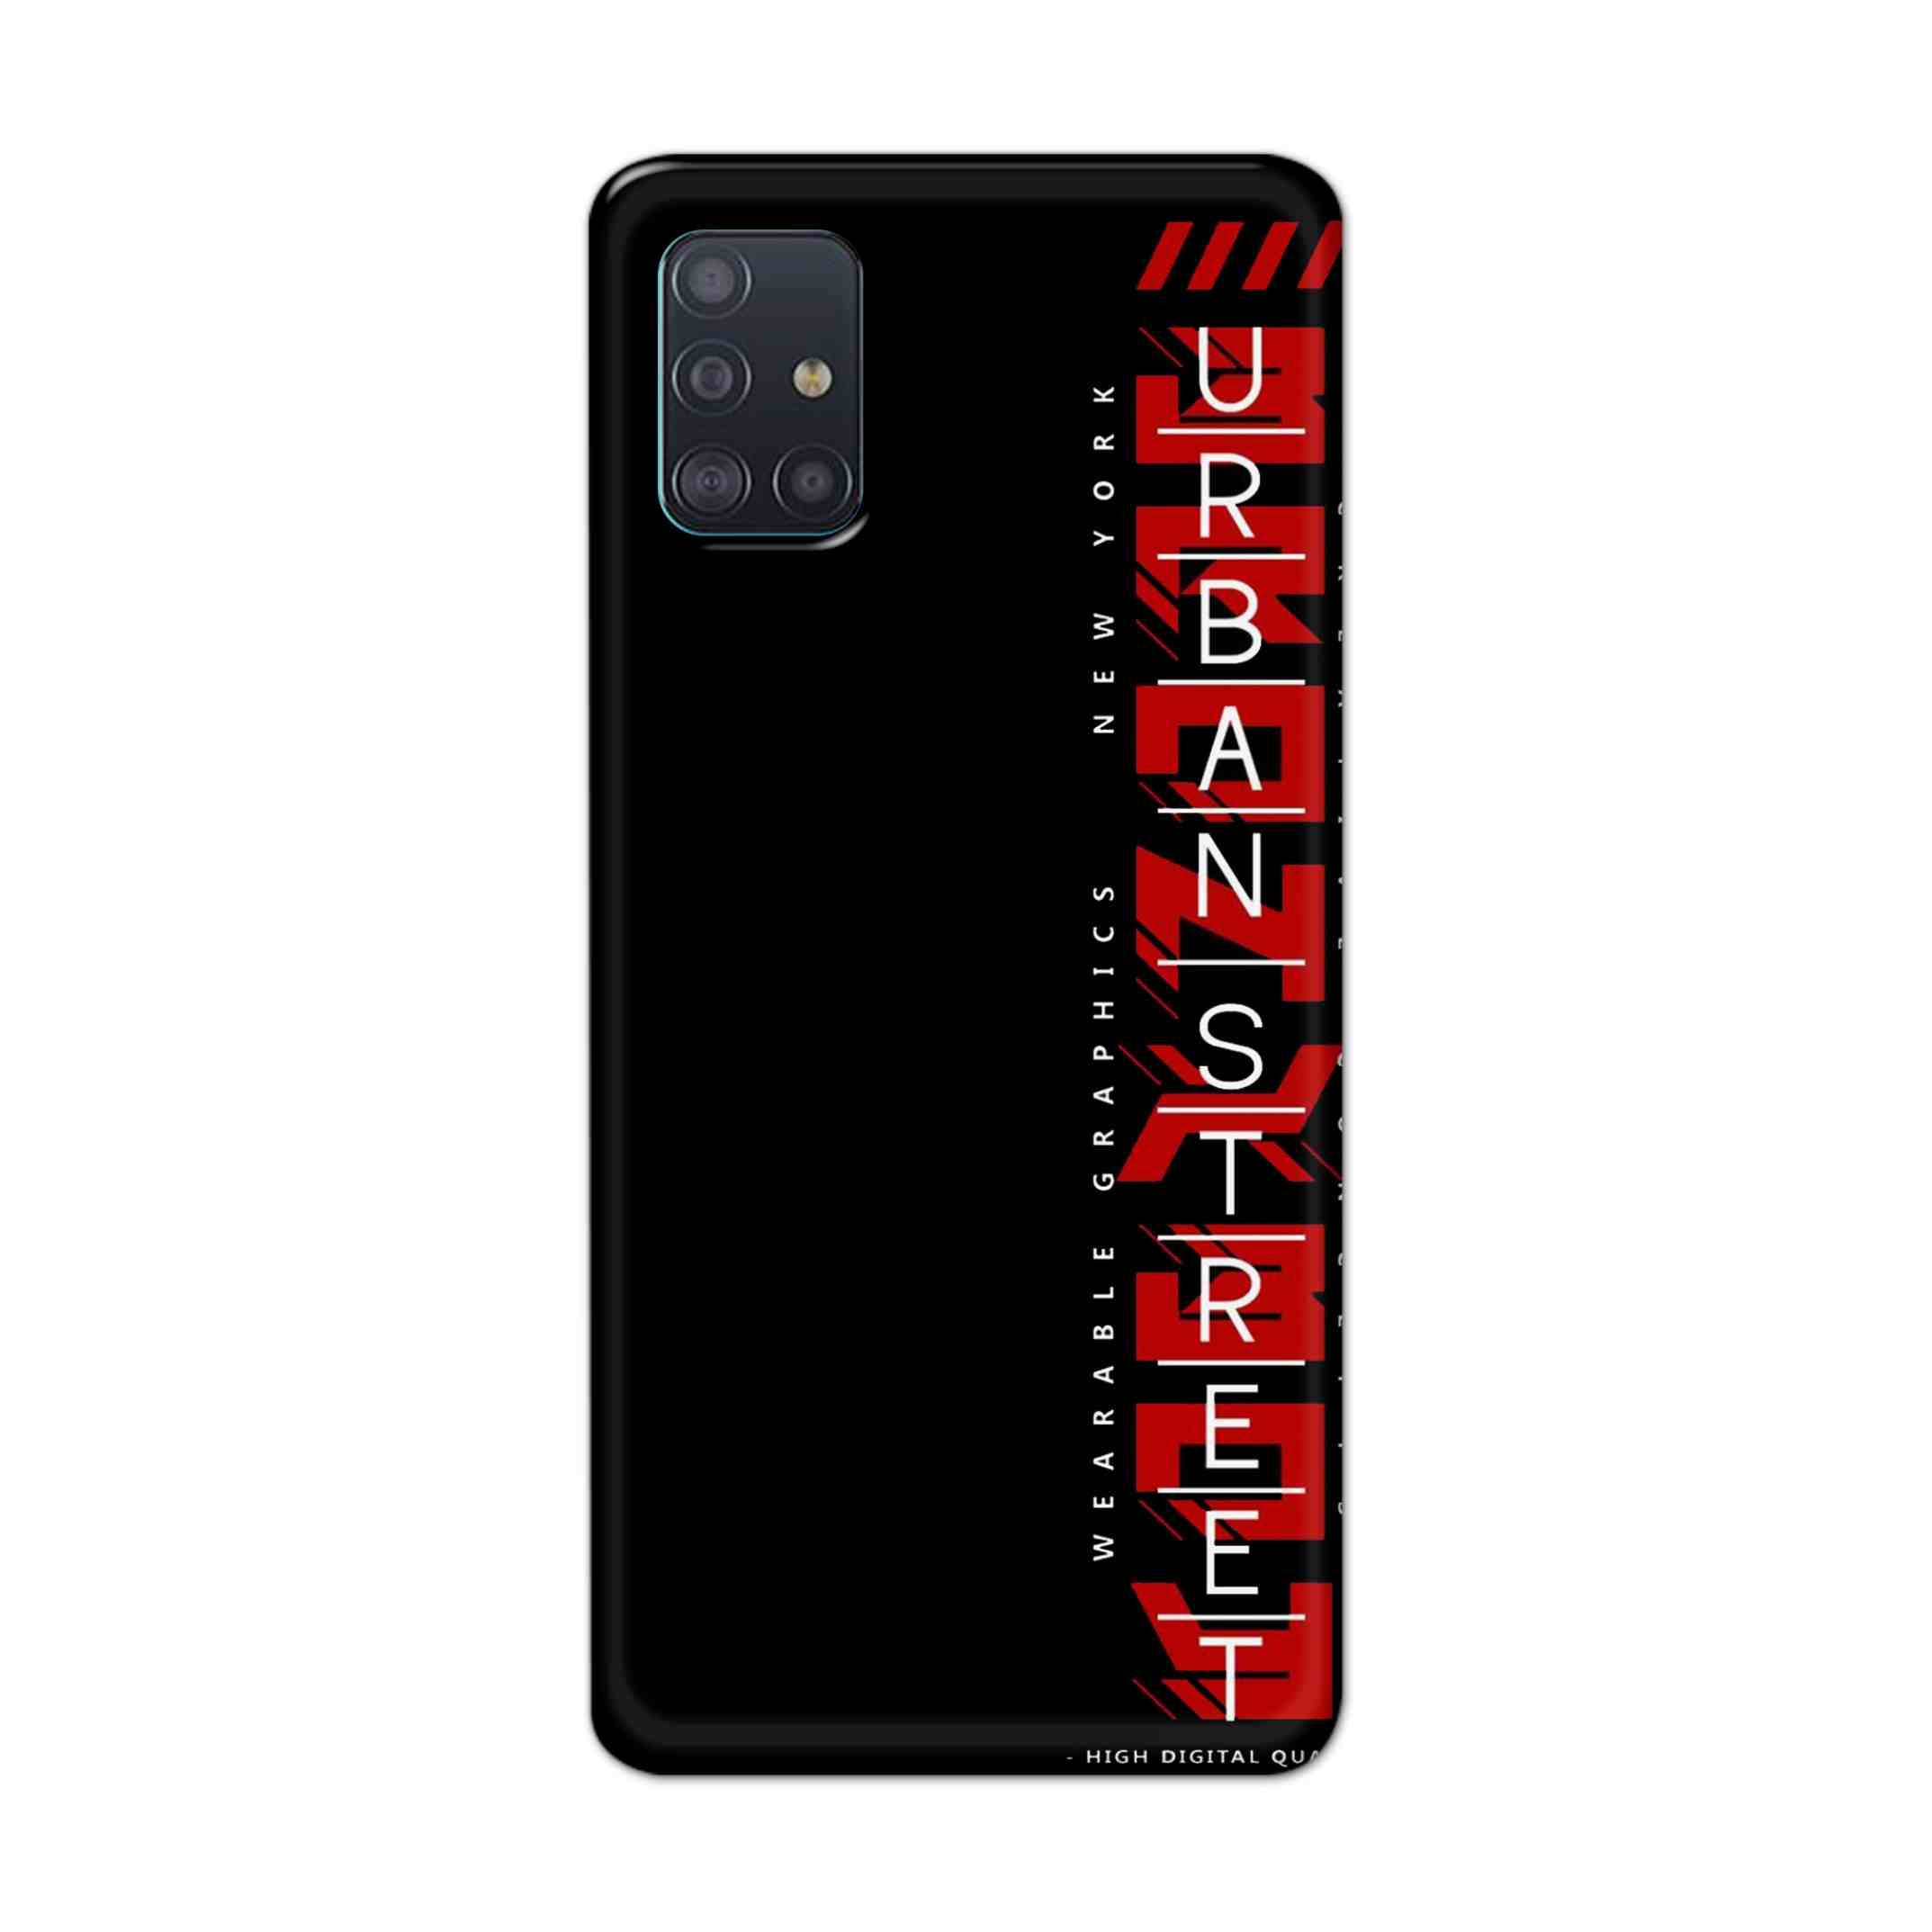 Buy Urban Street Hard Back Mobile Phone Case Cover For Samsung Galaxy A71 Online